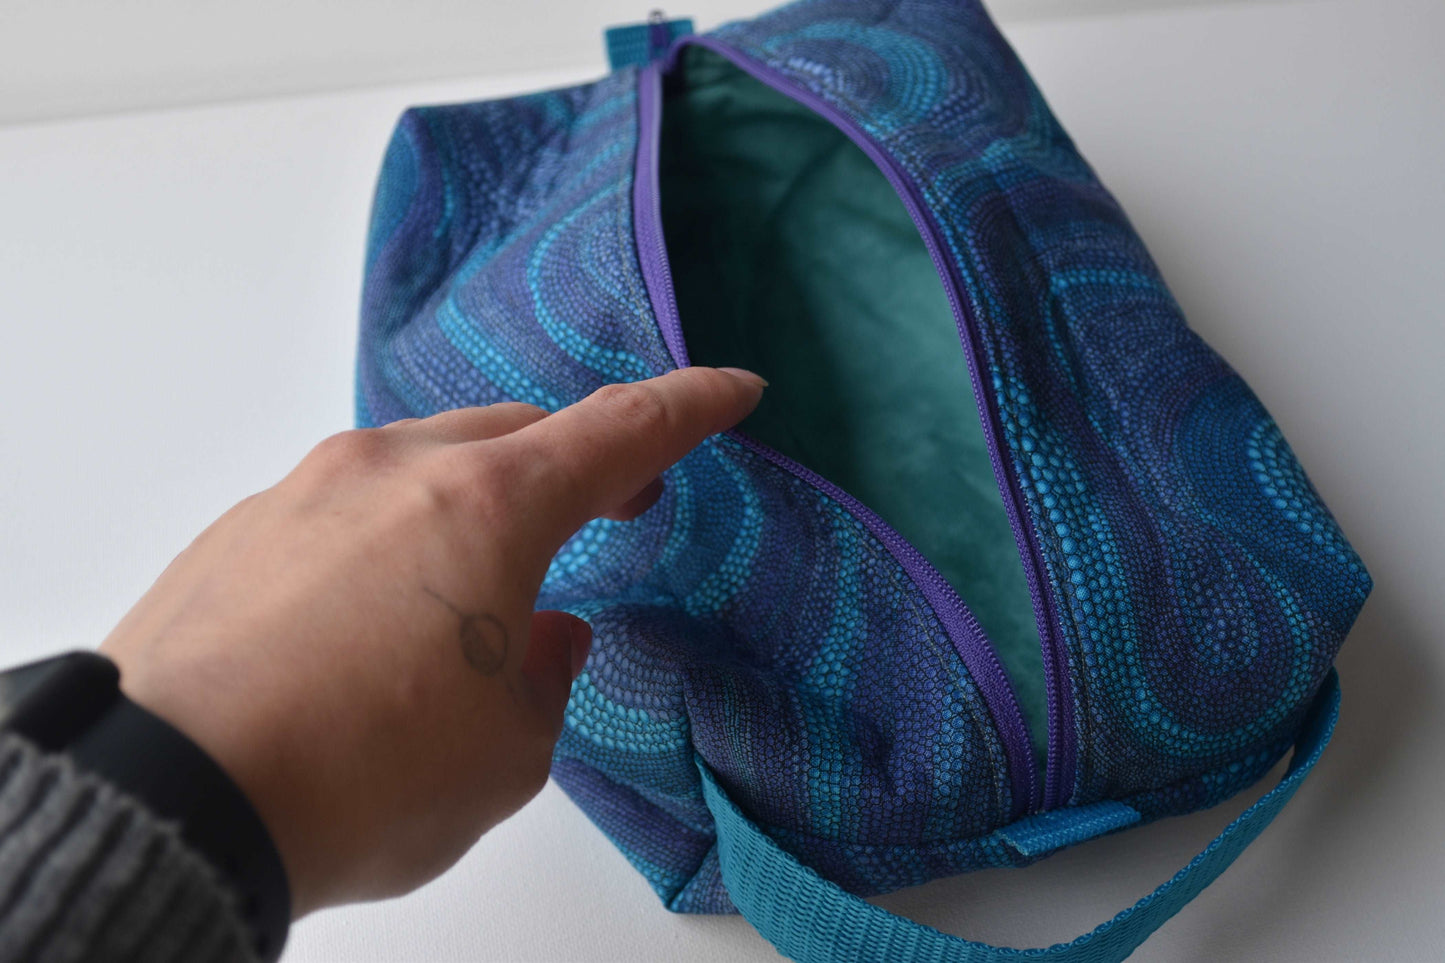 Box Bag | Project Bags